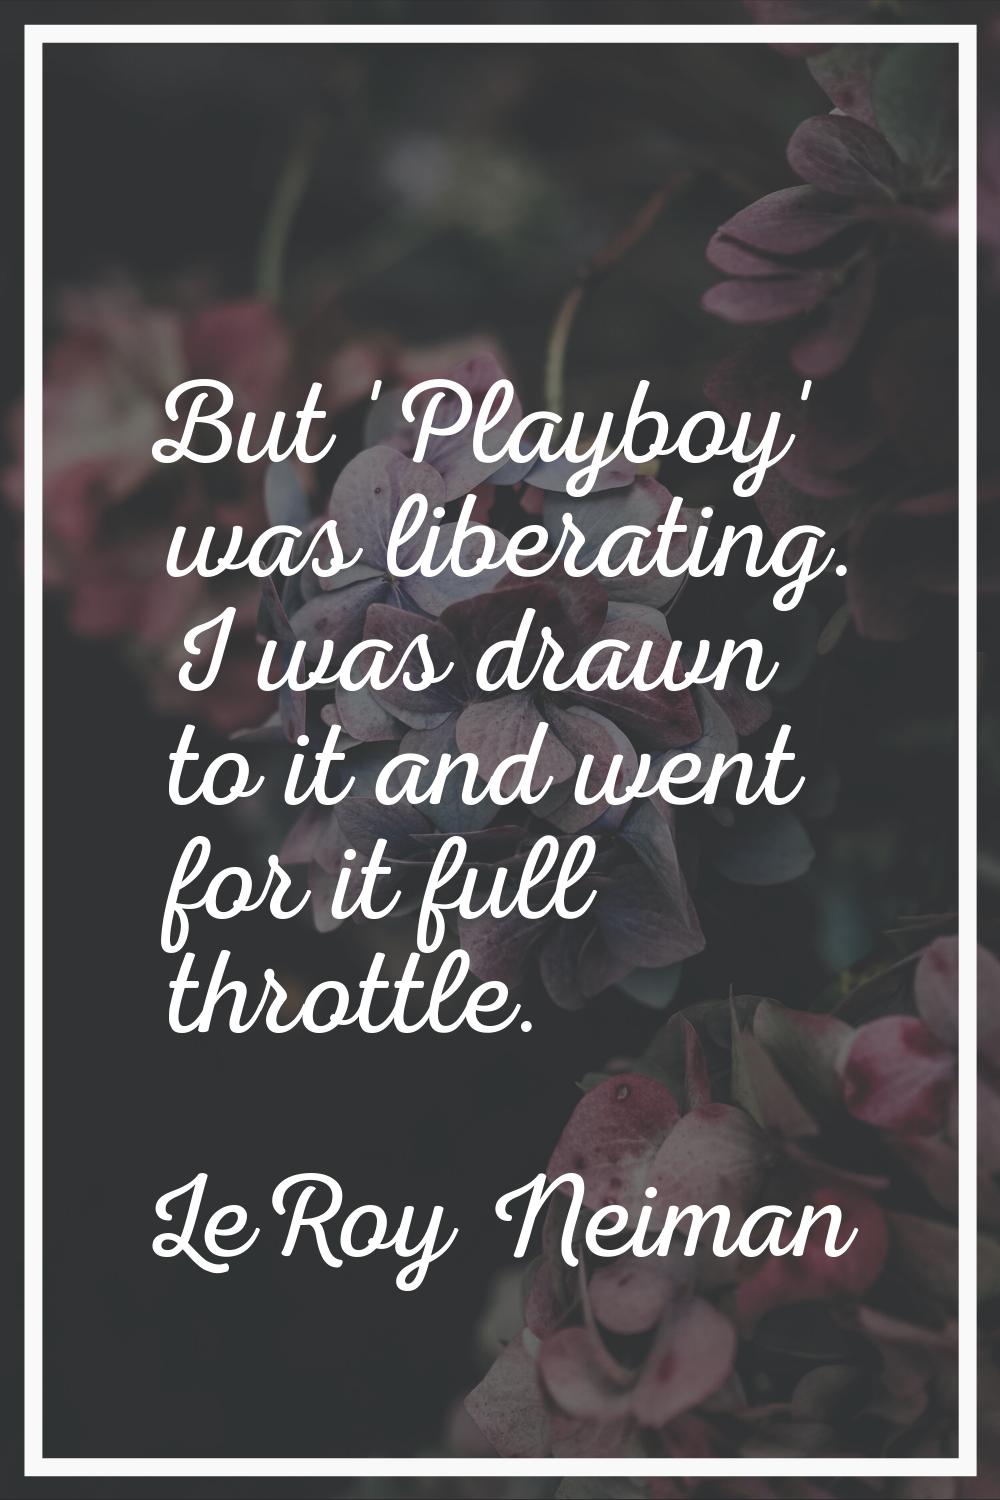 But 'Playboy' was liberating. I was drawn to it and went for it full throttle.